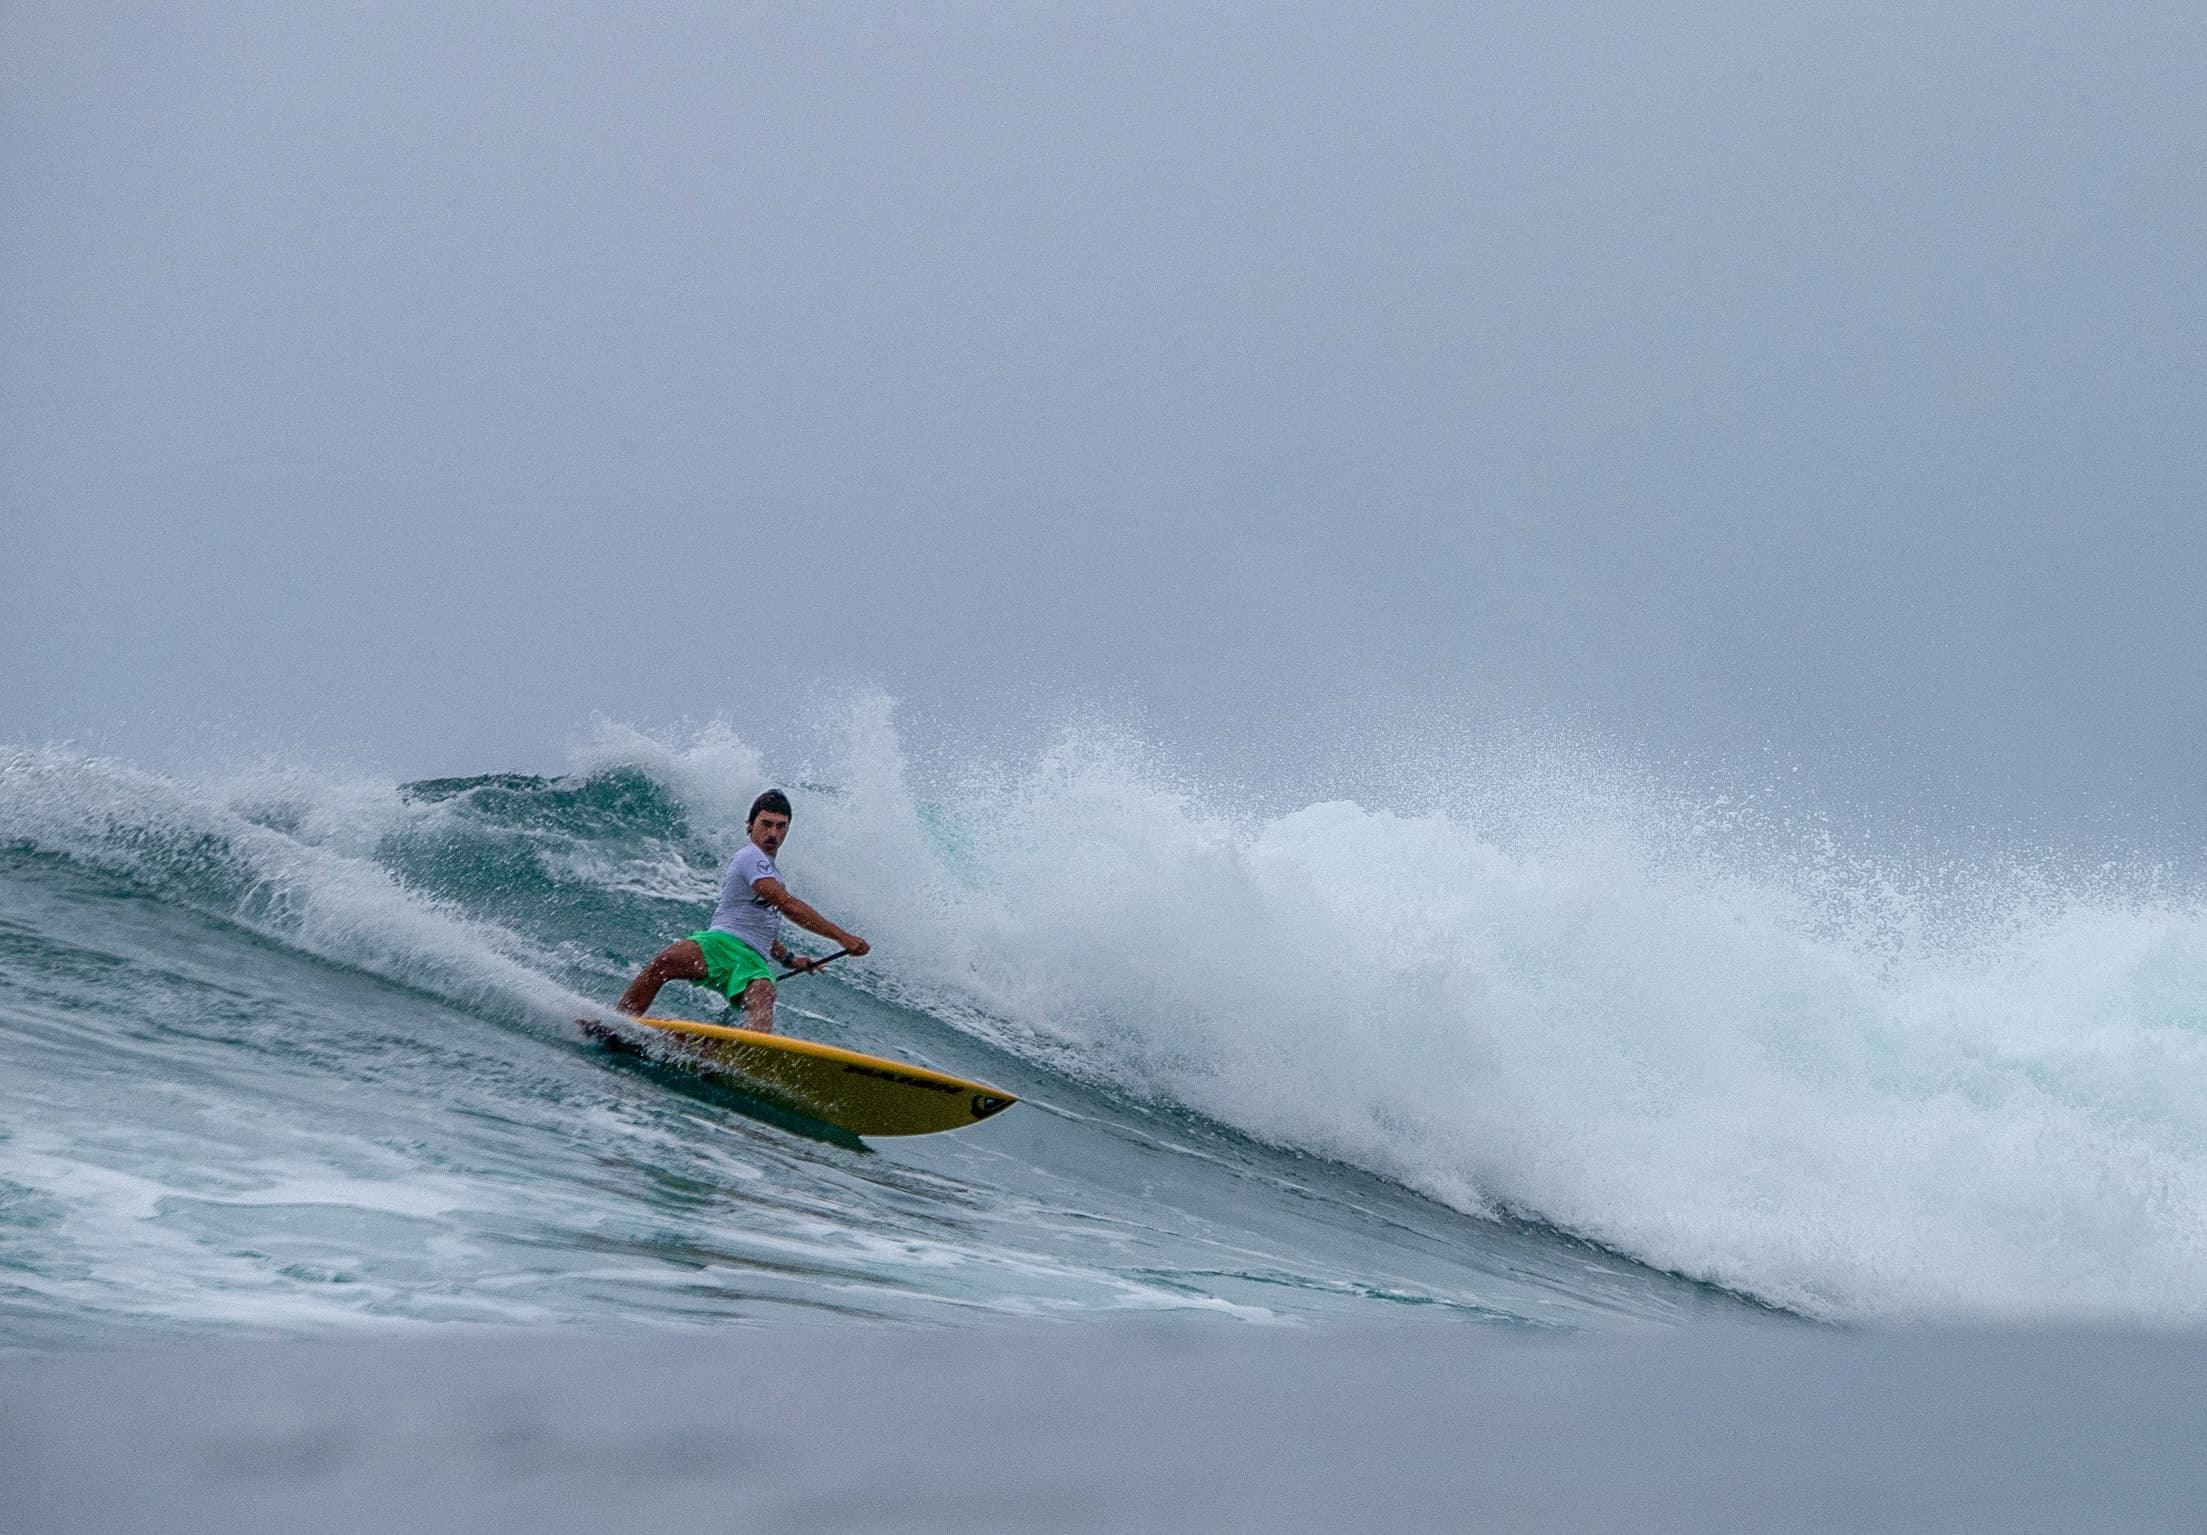 Bernd Roediger Places Second at 2019 Sunset Beach Pro - Naish.com